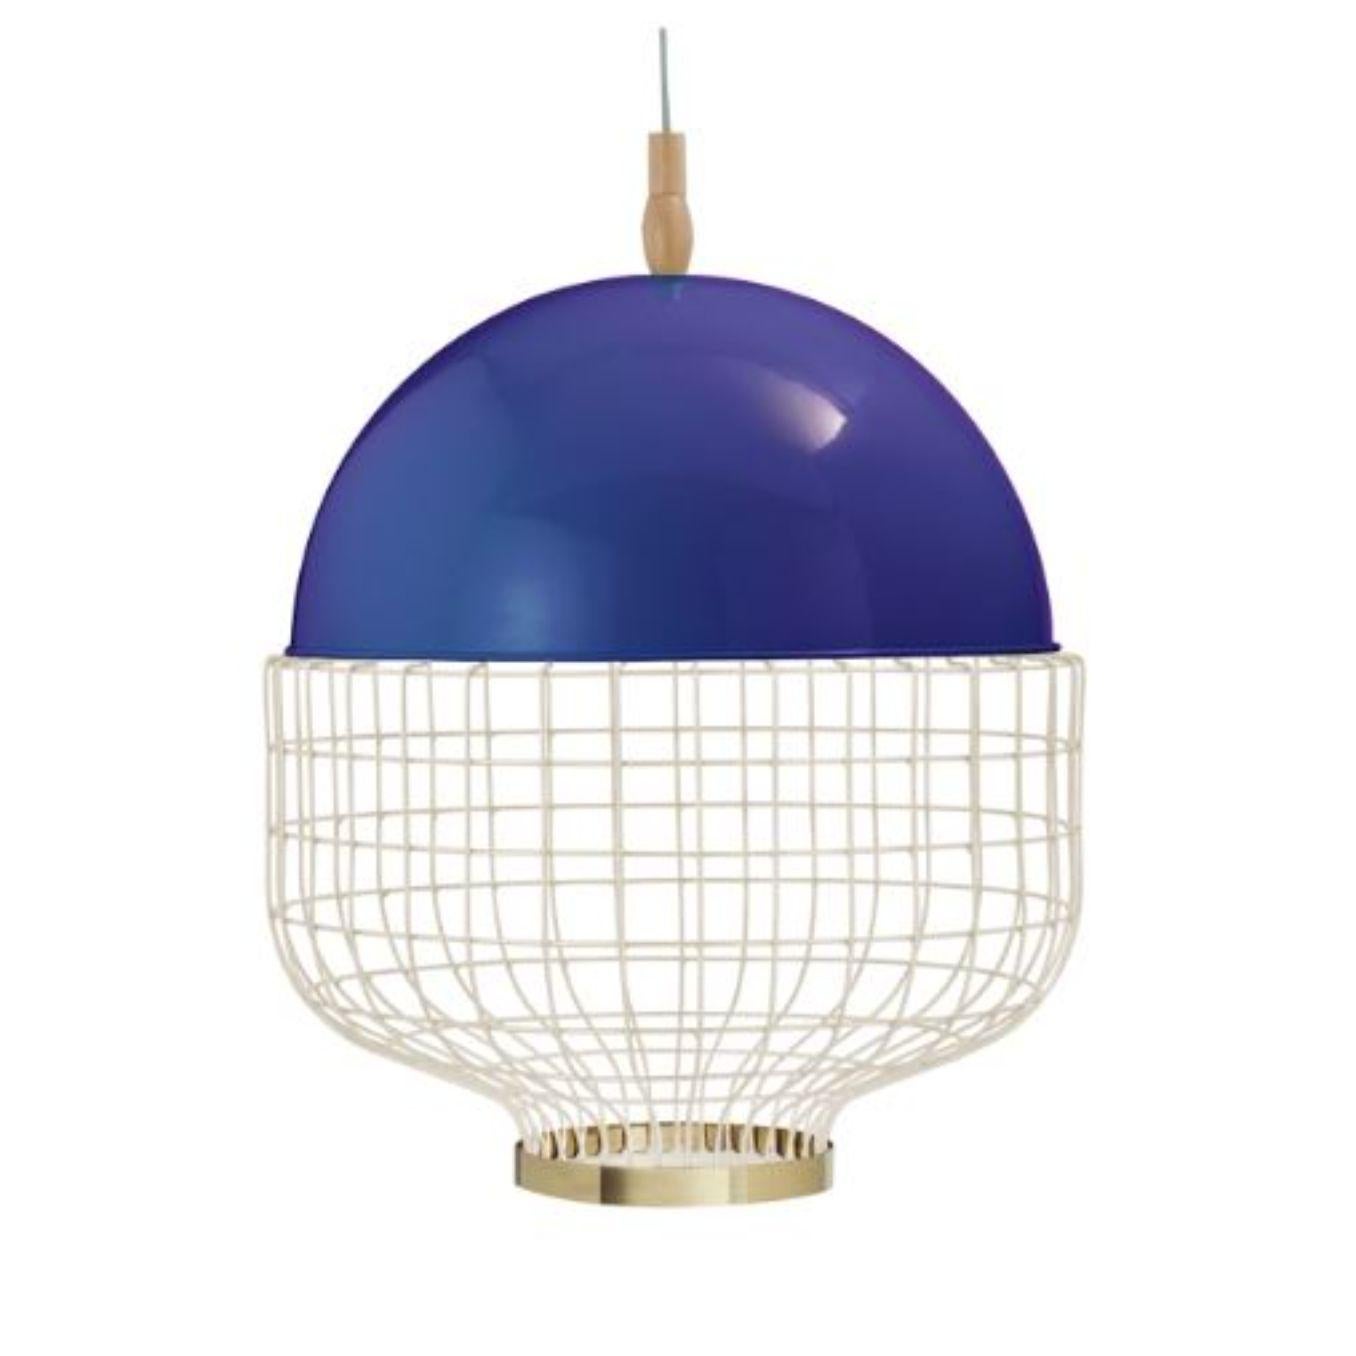 Cobalt magnolia suspension lamp with brass ring by Dooq.
Dimensions: W 65 x D 65 x H 68 cm.
Materials: lacquered metal, polished or brushed metal, brass.
Also available in different colours and materials.

Information:
230V/50Hz
E27/1x20W